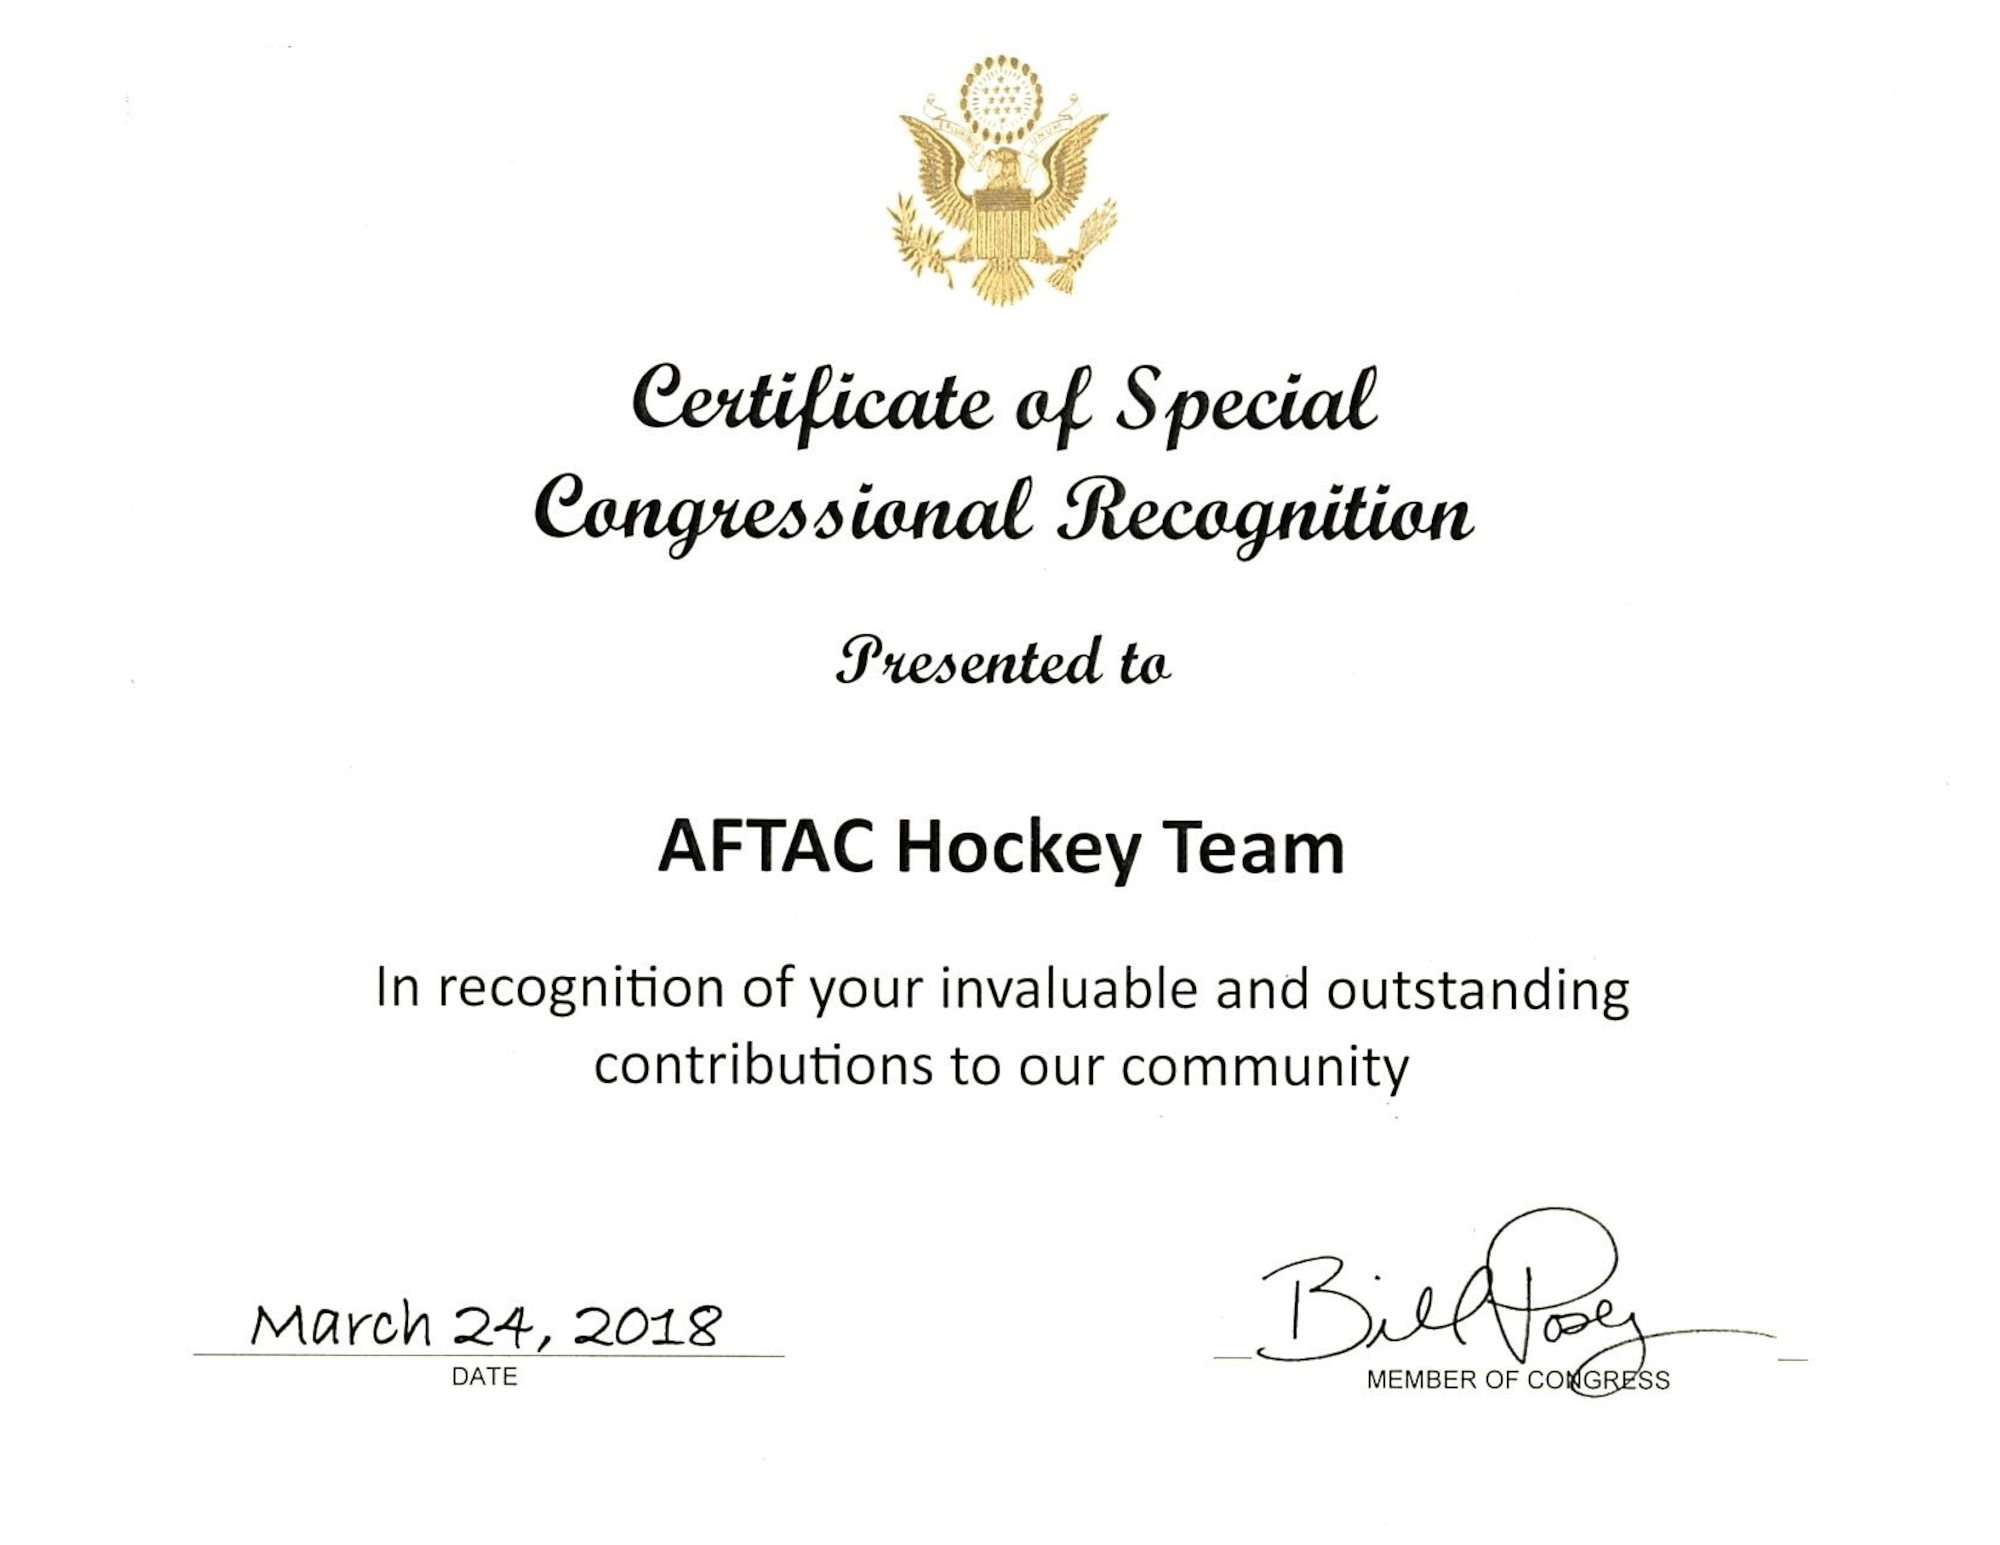 A photo of the certificate that was presented to members of the Air Force Technical Applications Center hockey team March 24, 2018 from Rep. Bill Posey (FL-15) for the team’s charitable contributions and outstanding support to the community.  (U.S. Air Force photo by Susan A. Romano)